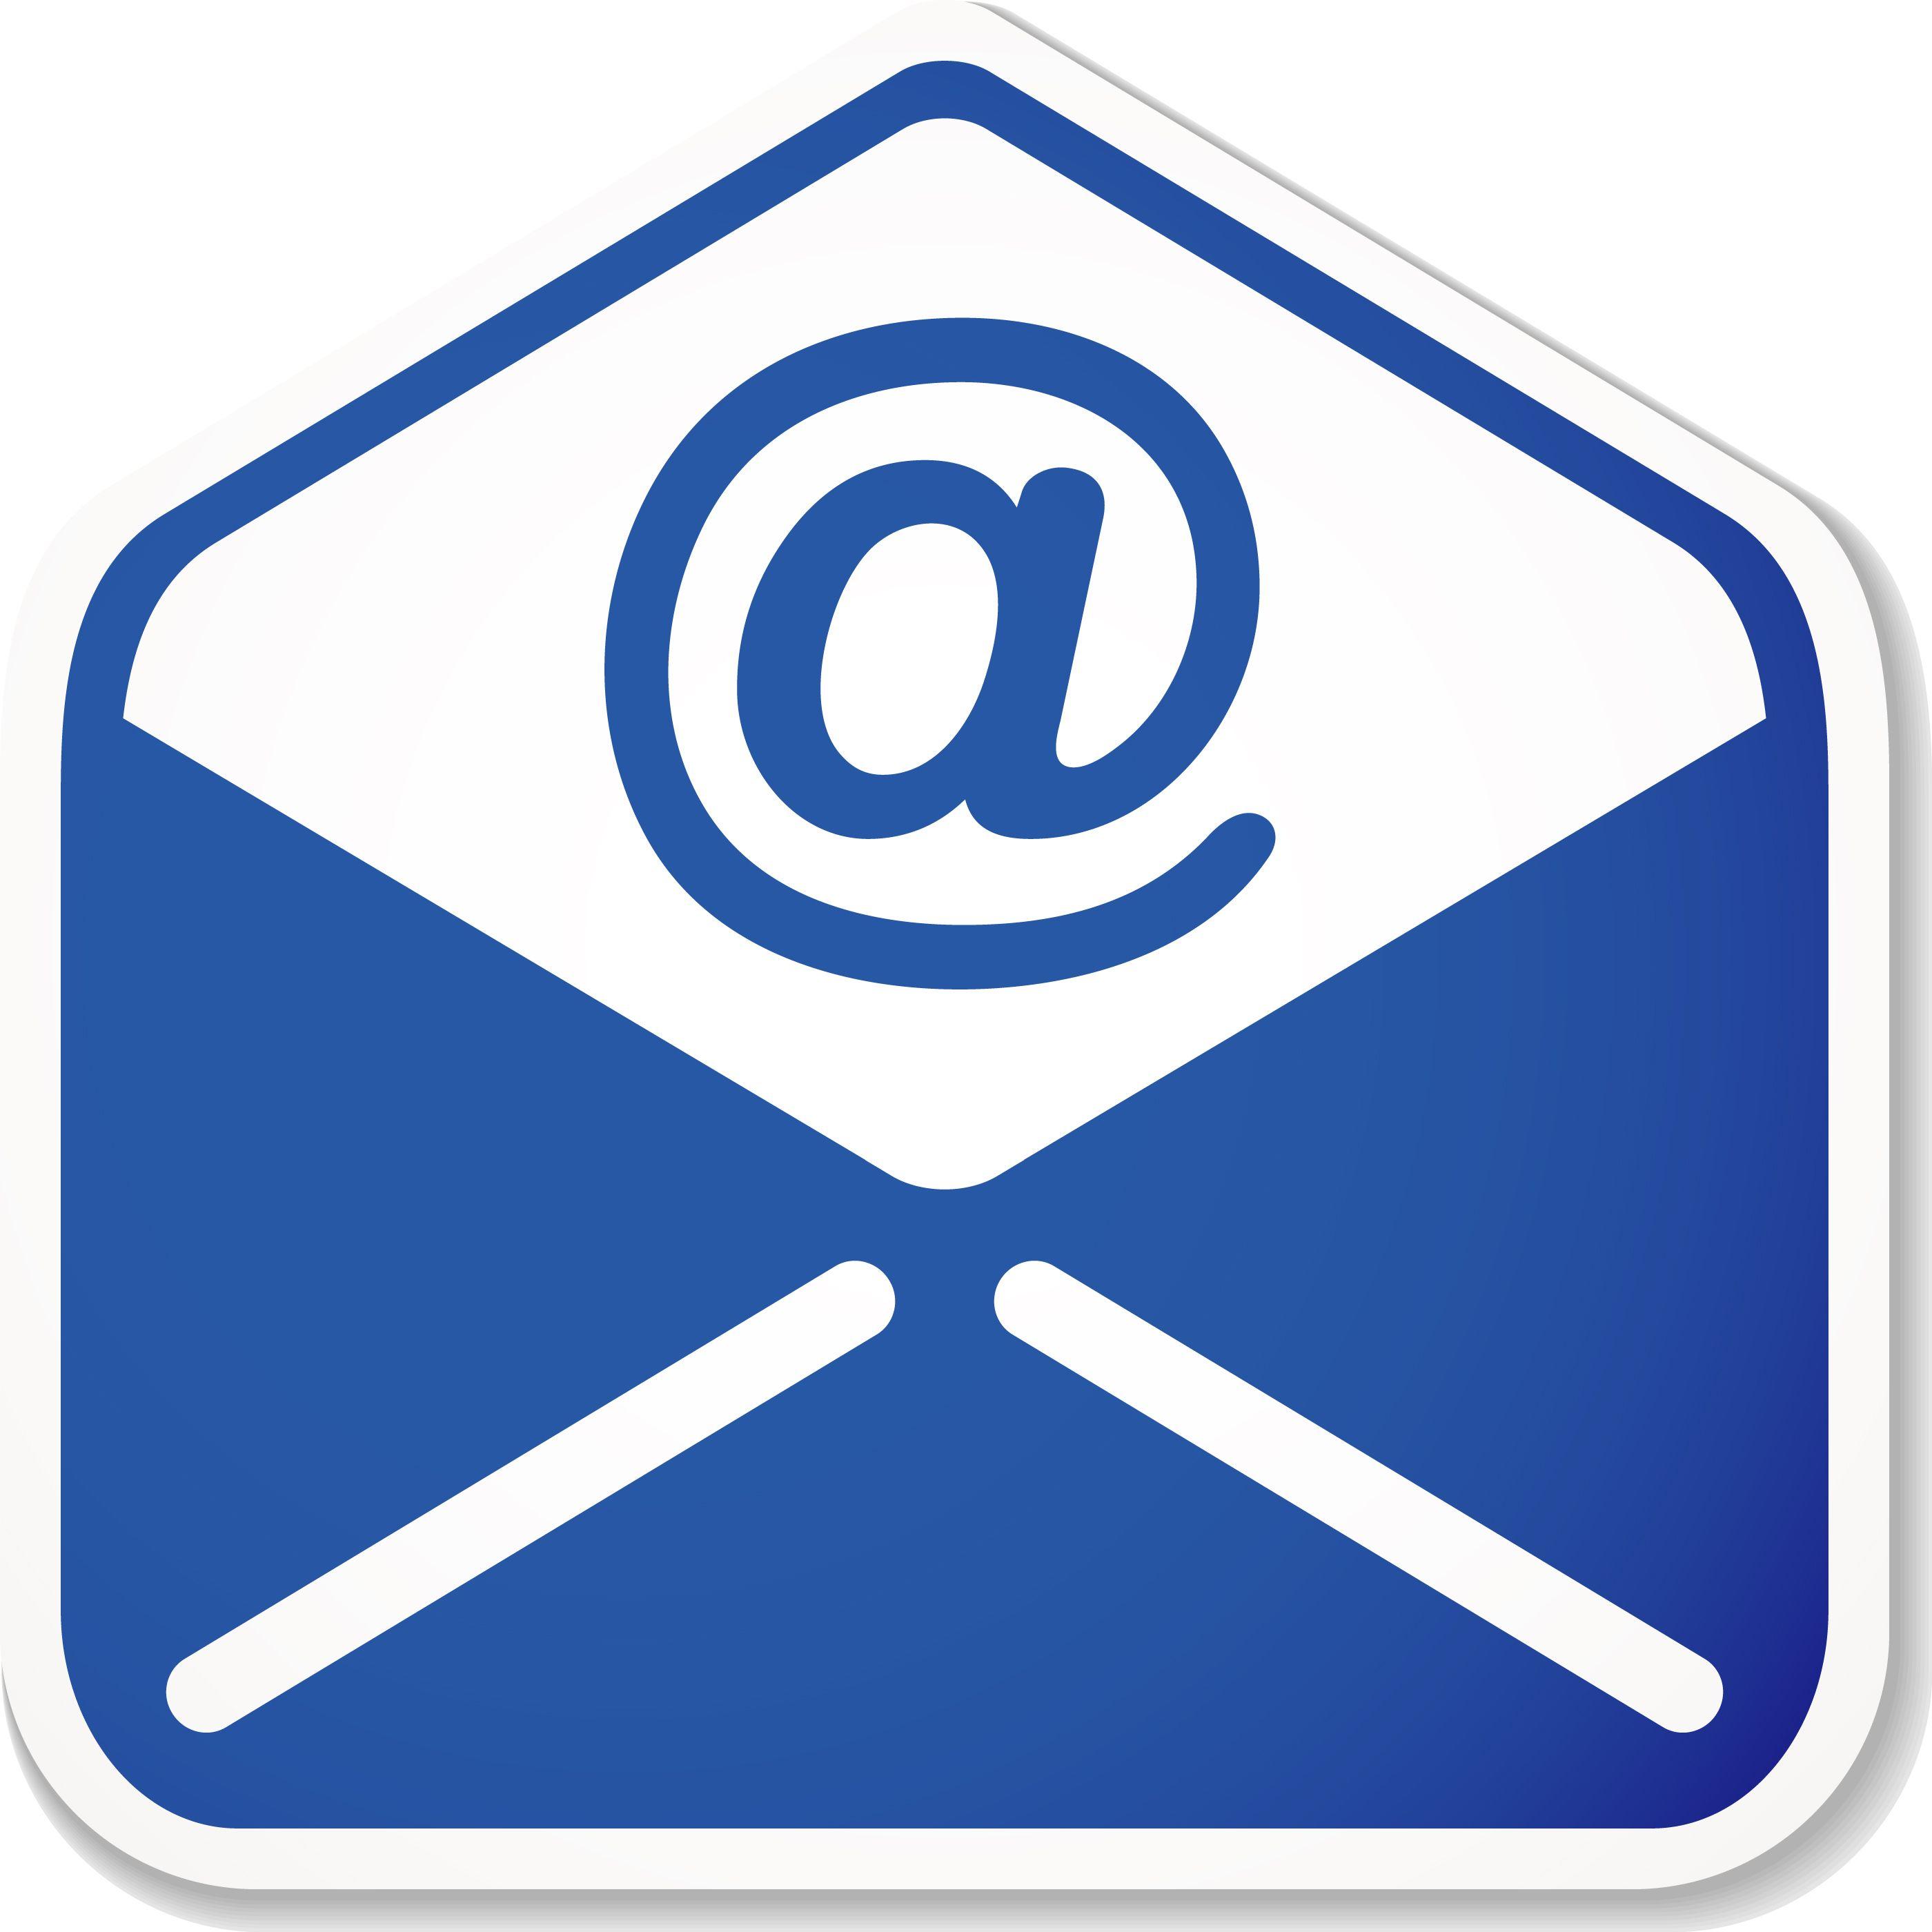 Email Logo - email logo.jpg | The Well Project